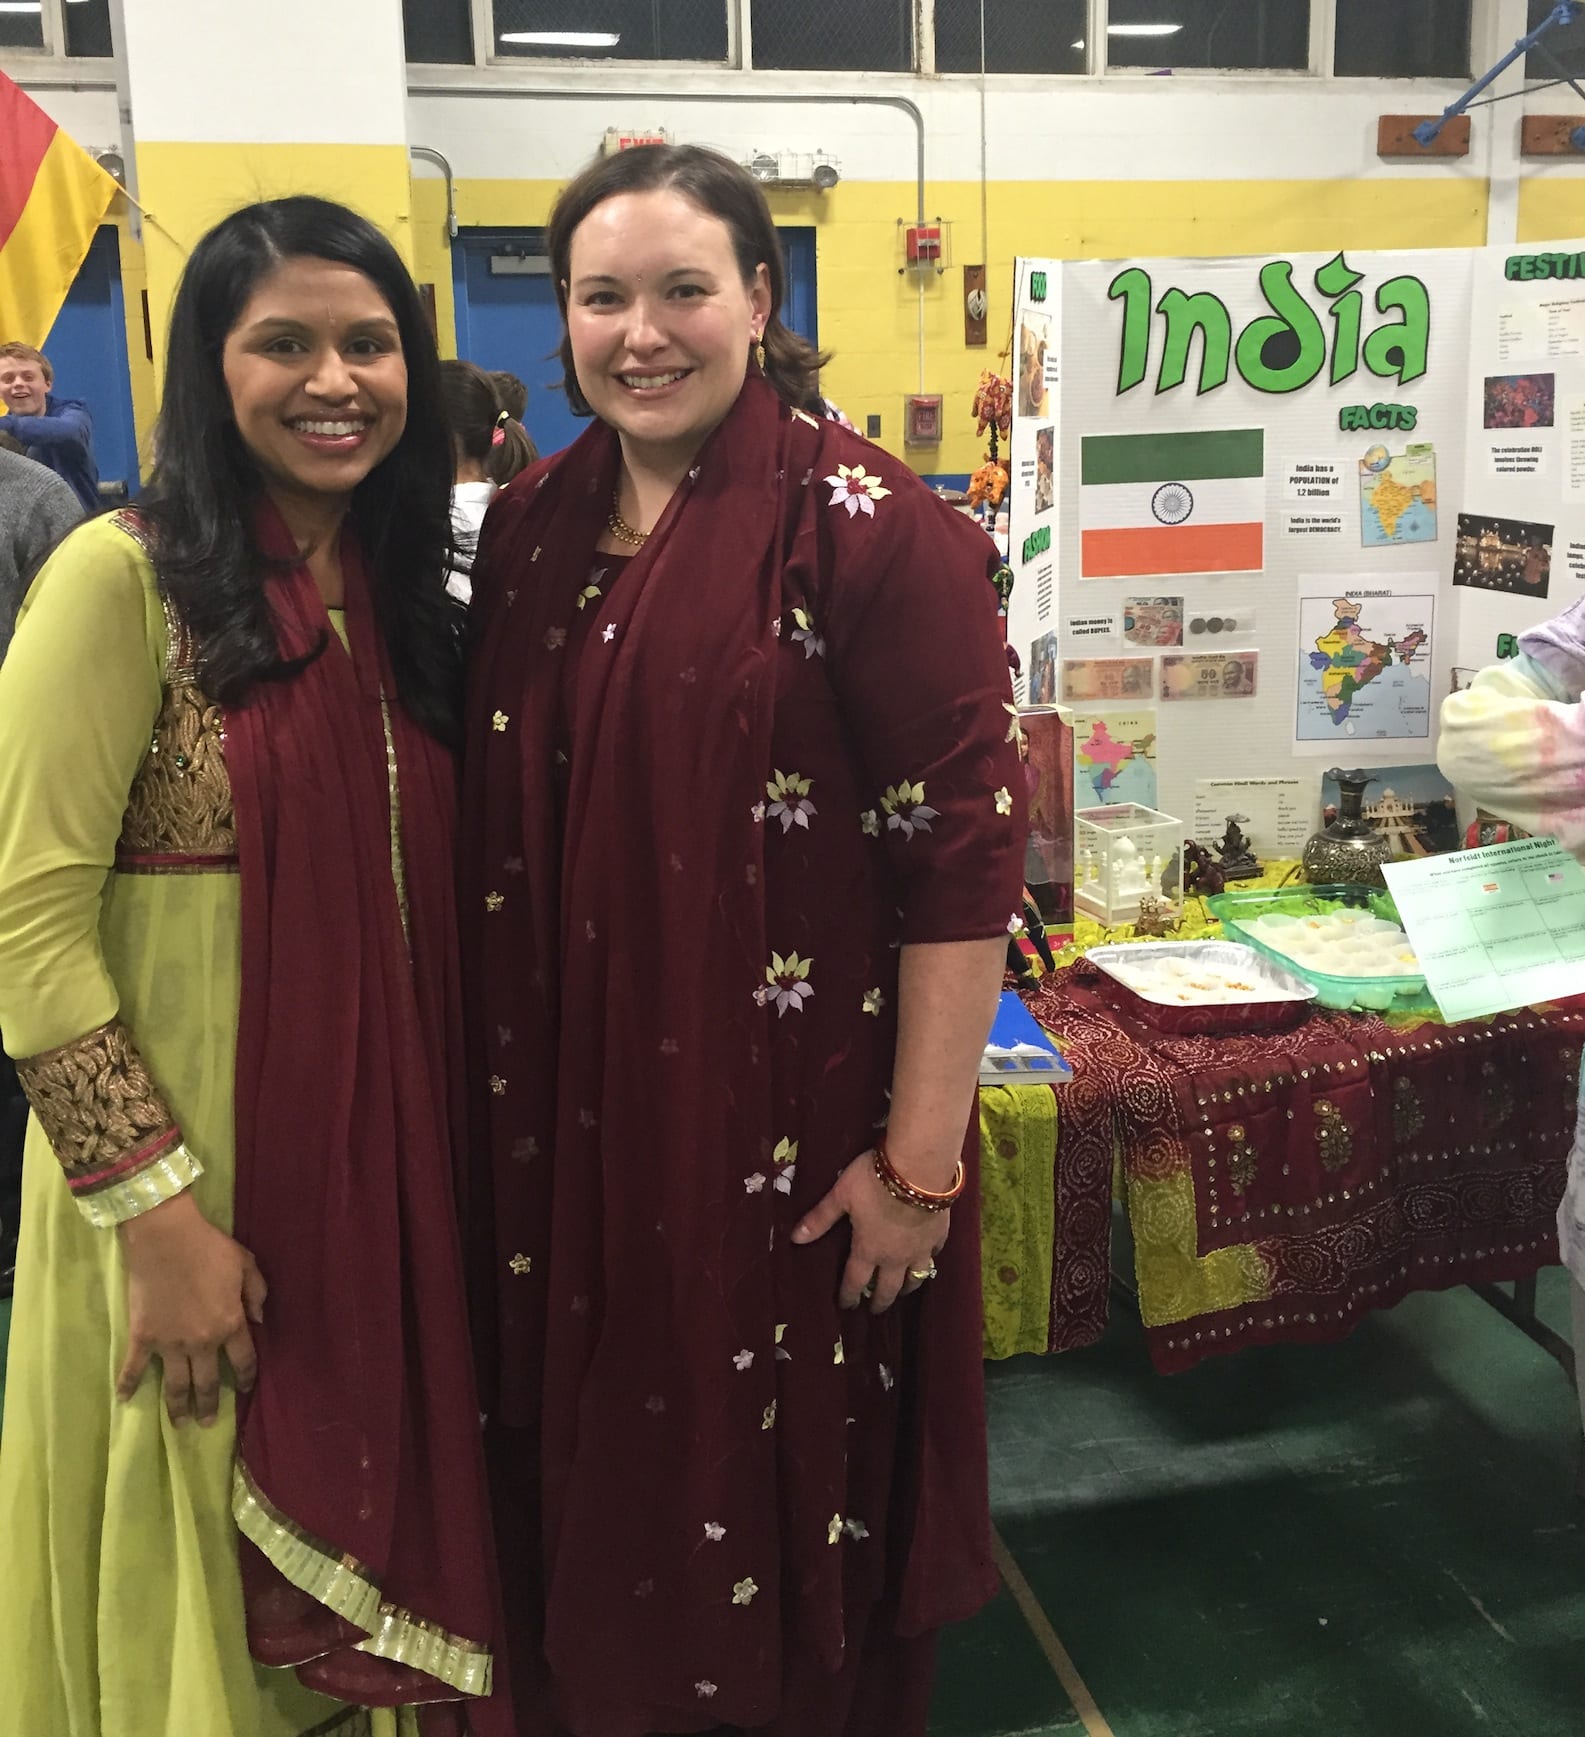 India booth at Norfeldt International Night. Submitted photo